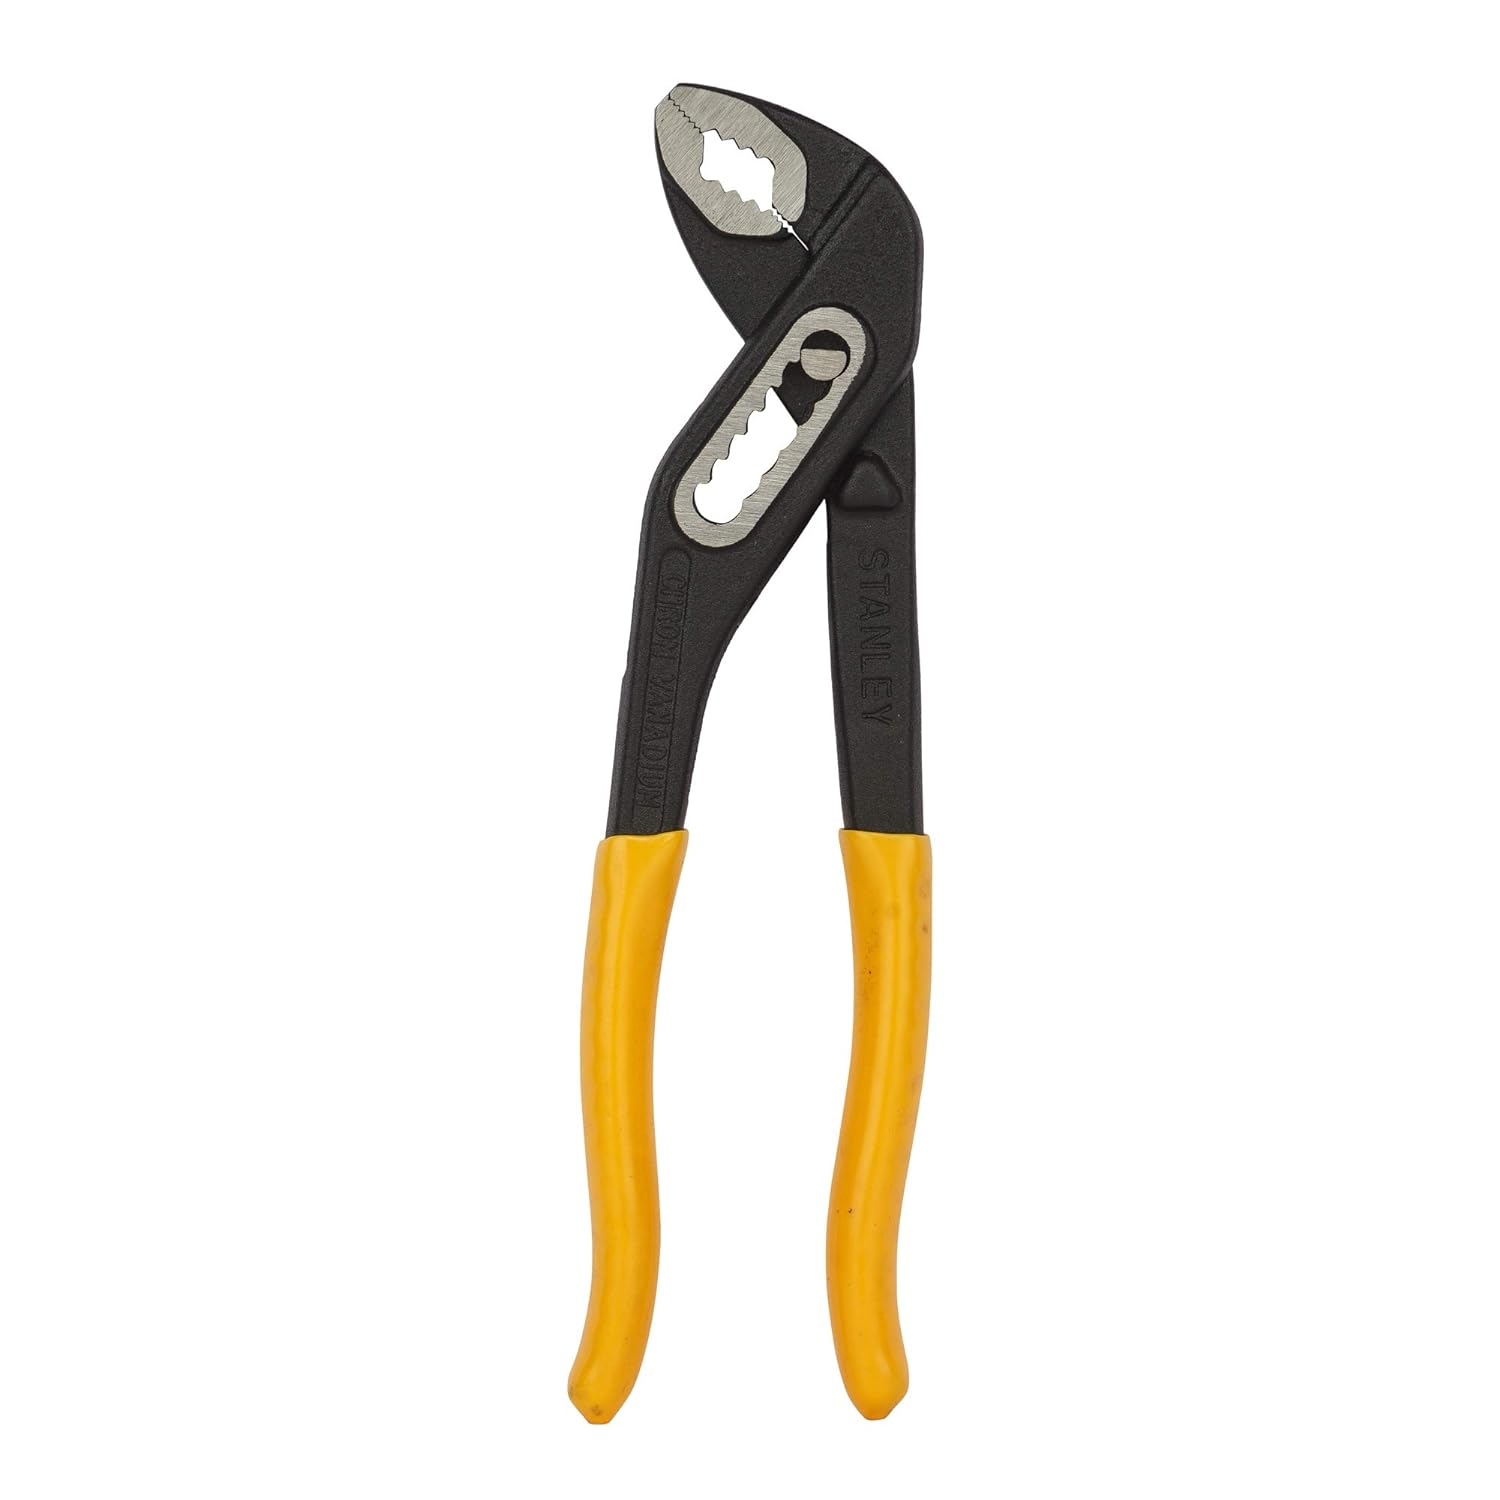 STANLEY 71-669 10 Steel Slim Water Joint Curve Pump Plier with Anti-Corrosion Properties for Plumbing Use